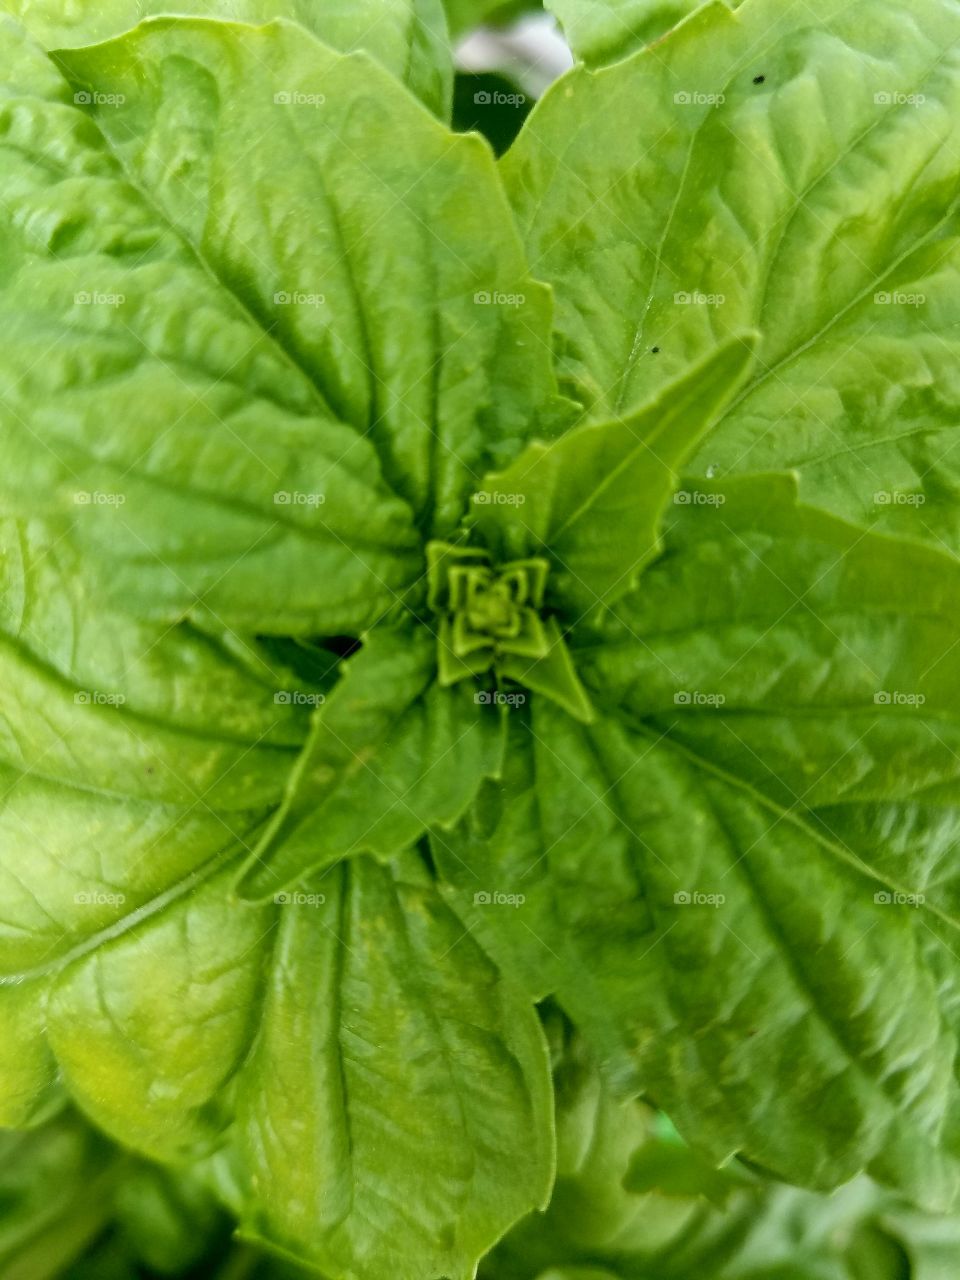 Extreme close-up of basil leaves